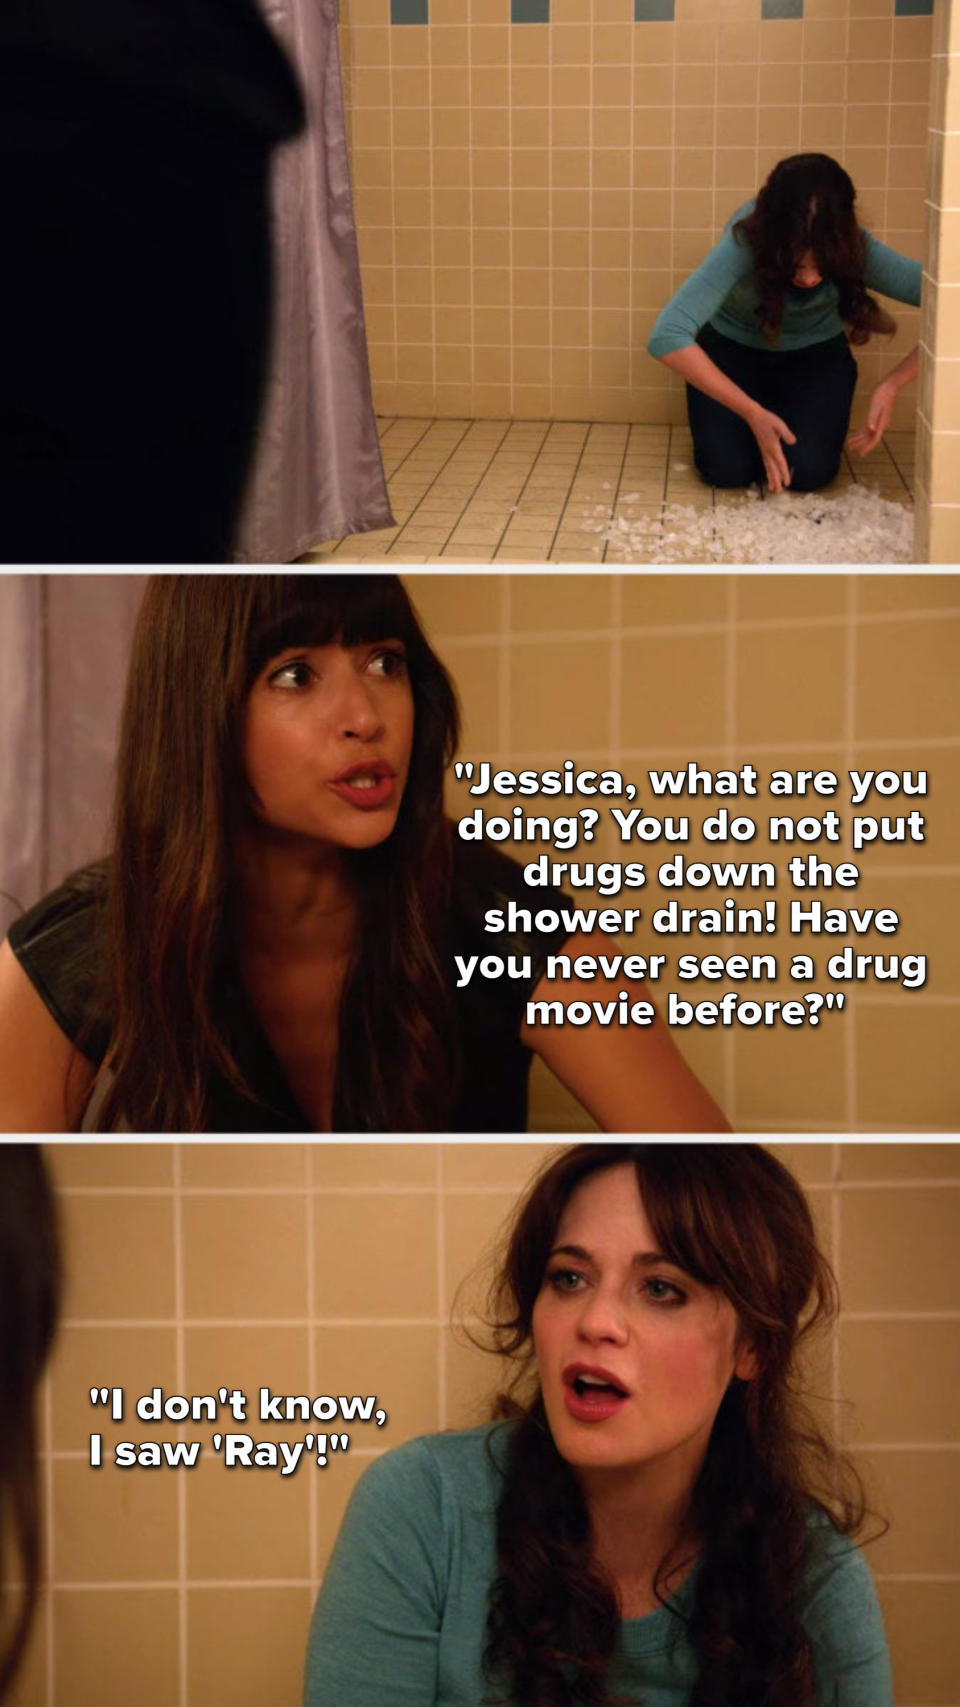 Cece walks in on Jess putting meth down the shower drain and says, Jessica, what are you doing, you do not put drugs down the shower drain, have you never seen a drug movie before, and Jess says, I don't know, I saw Ray